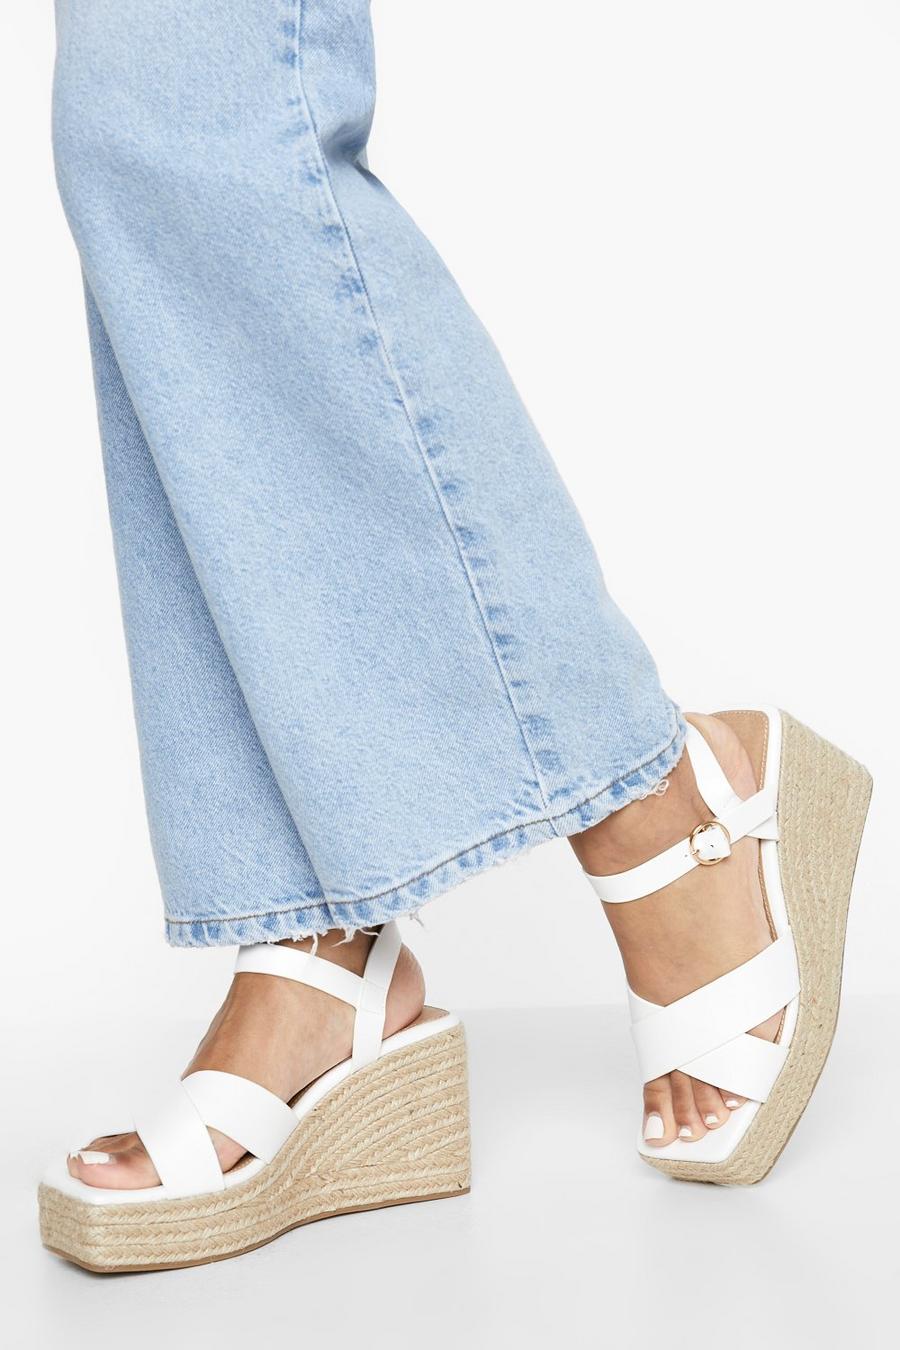 White Square Toe Crossover Wedge